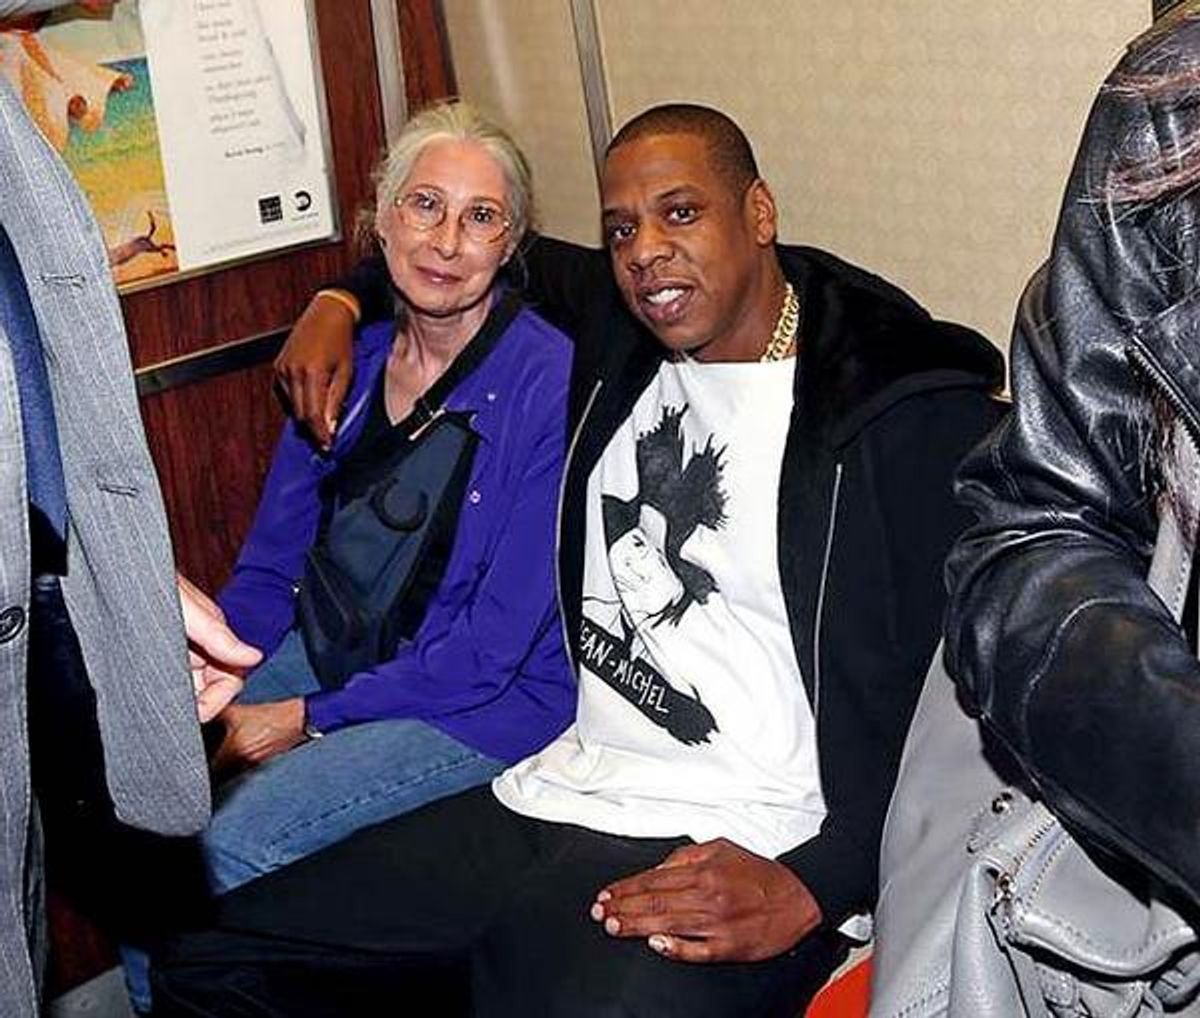  Jay-Z poses with a woman on the R train before Saturday night's performance  (Lawrence Scwartzwald/Splash News)